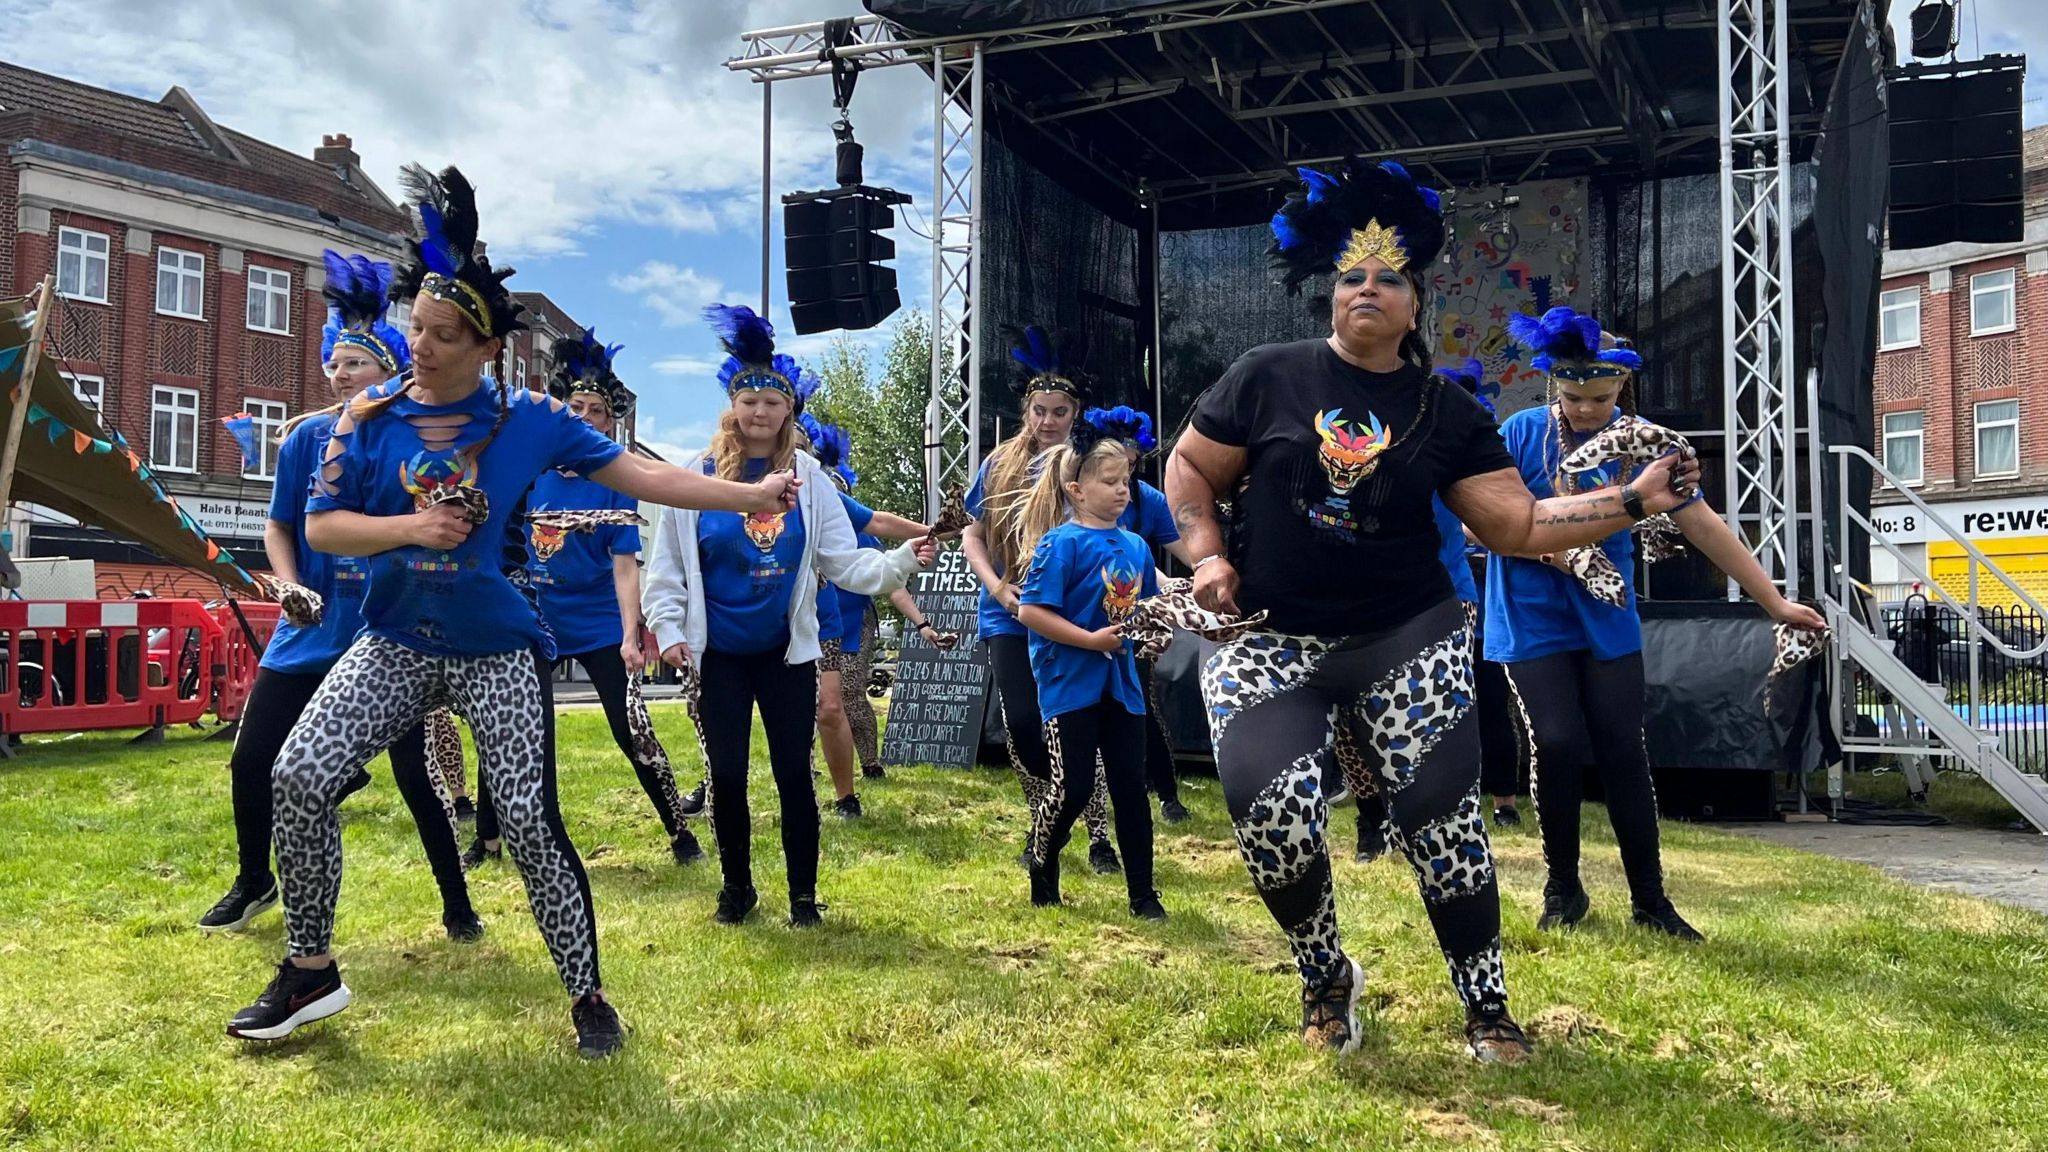 A group of dancers in blue tops and printed trousers dance during the Knowle West community day